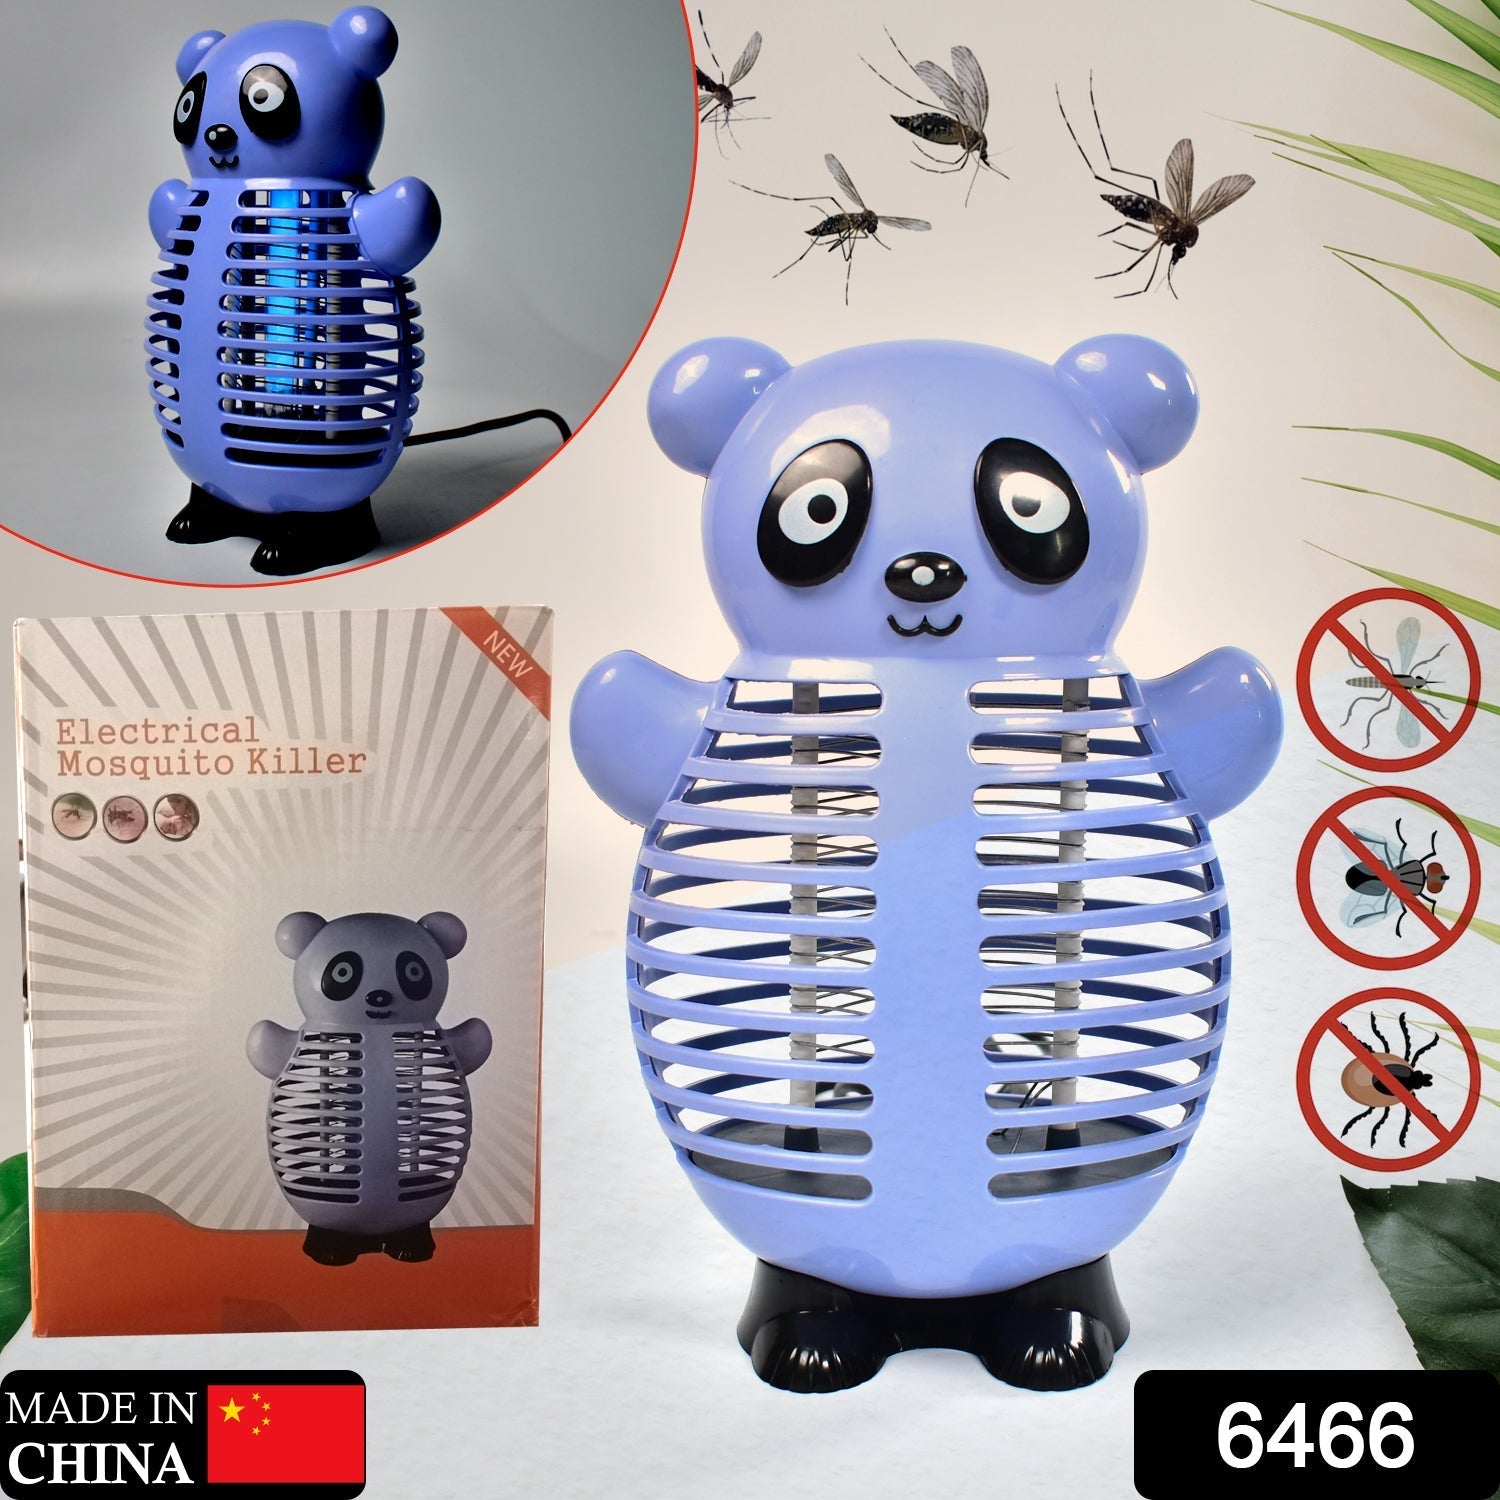 6466 Electronic Cartoon Led Mosquito Killer | Lamps Super Trap Machine For Home Insect Killer | Bug Zapper | USB Powered Machine Eco-Friendly Baby Mosquito Repellent Lamp |Jali Mosquito. JK Trends